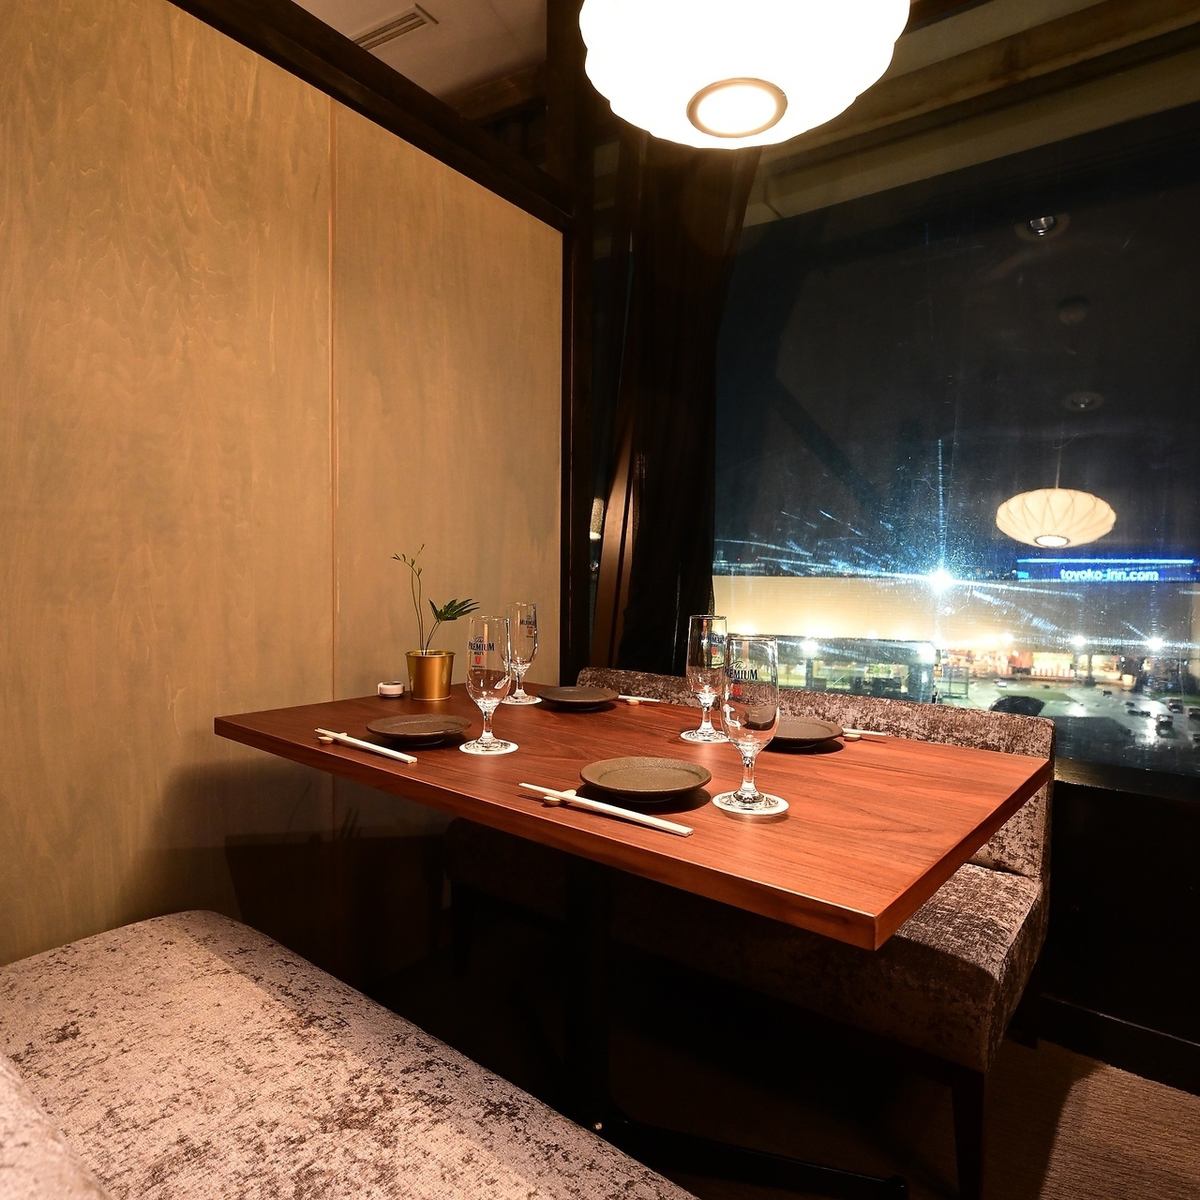 ◇Completely private rooms available◇Overlooking the night view of Toyota♪Relax elegantly in a stylish space